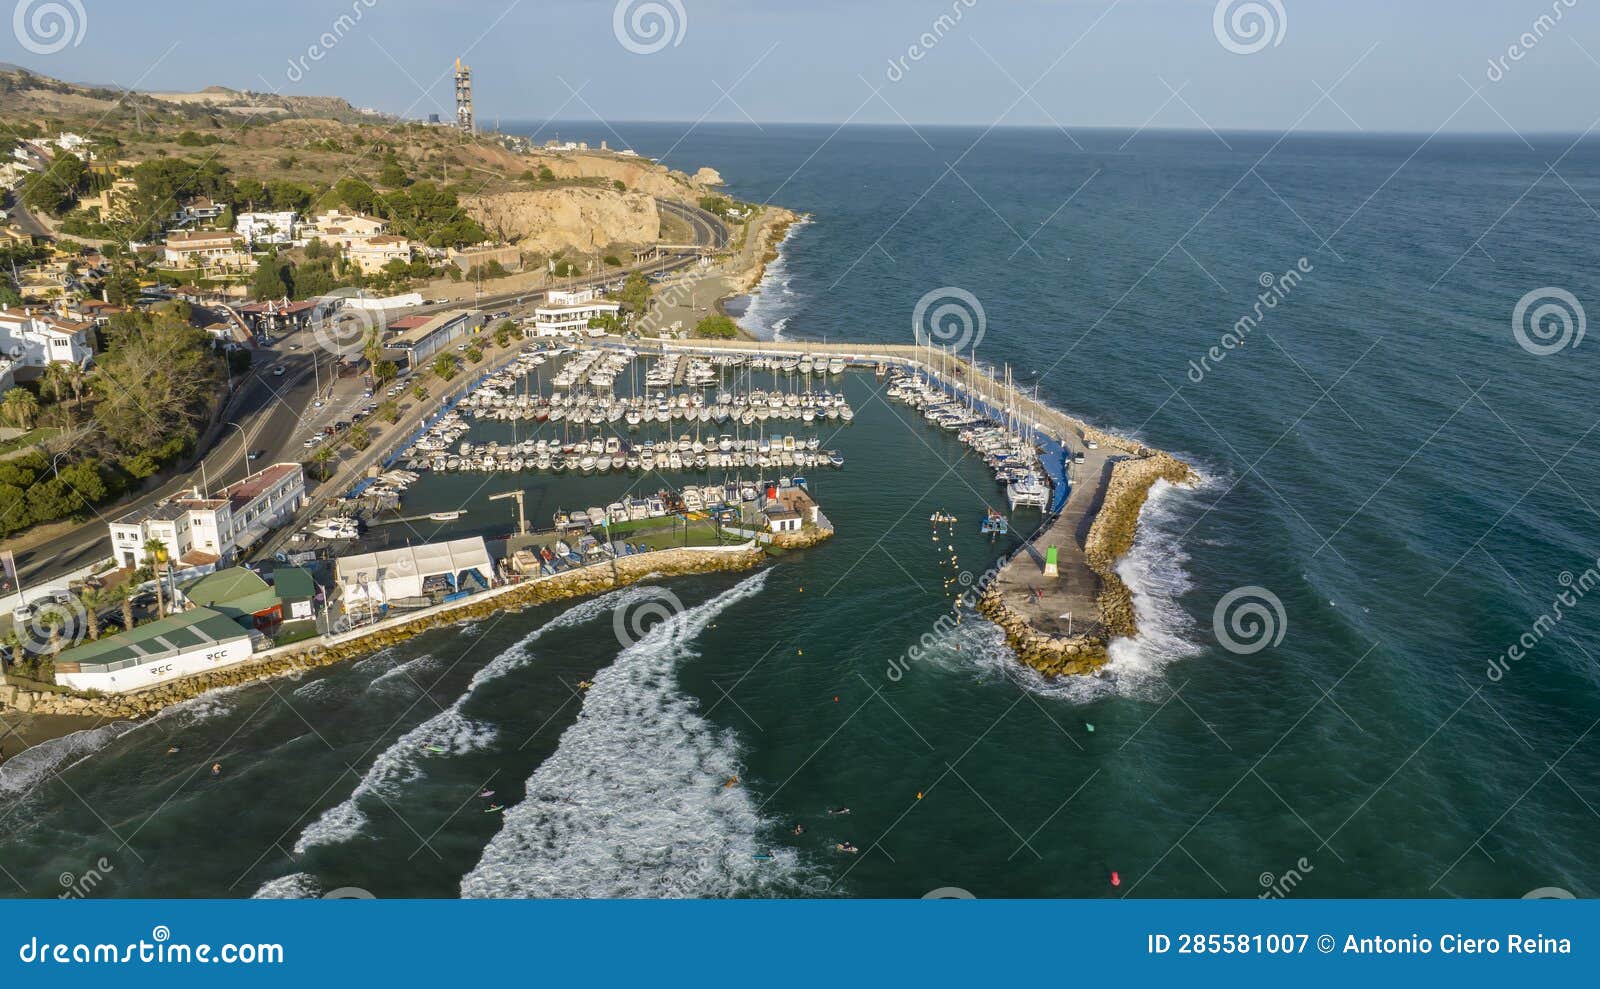 view of the port of el candado in the city of malaga, spain